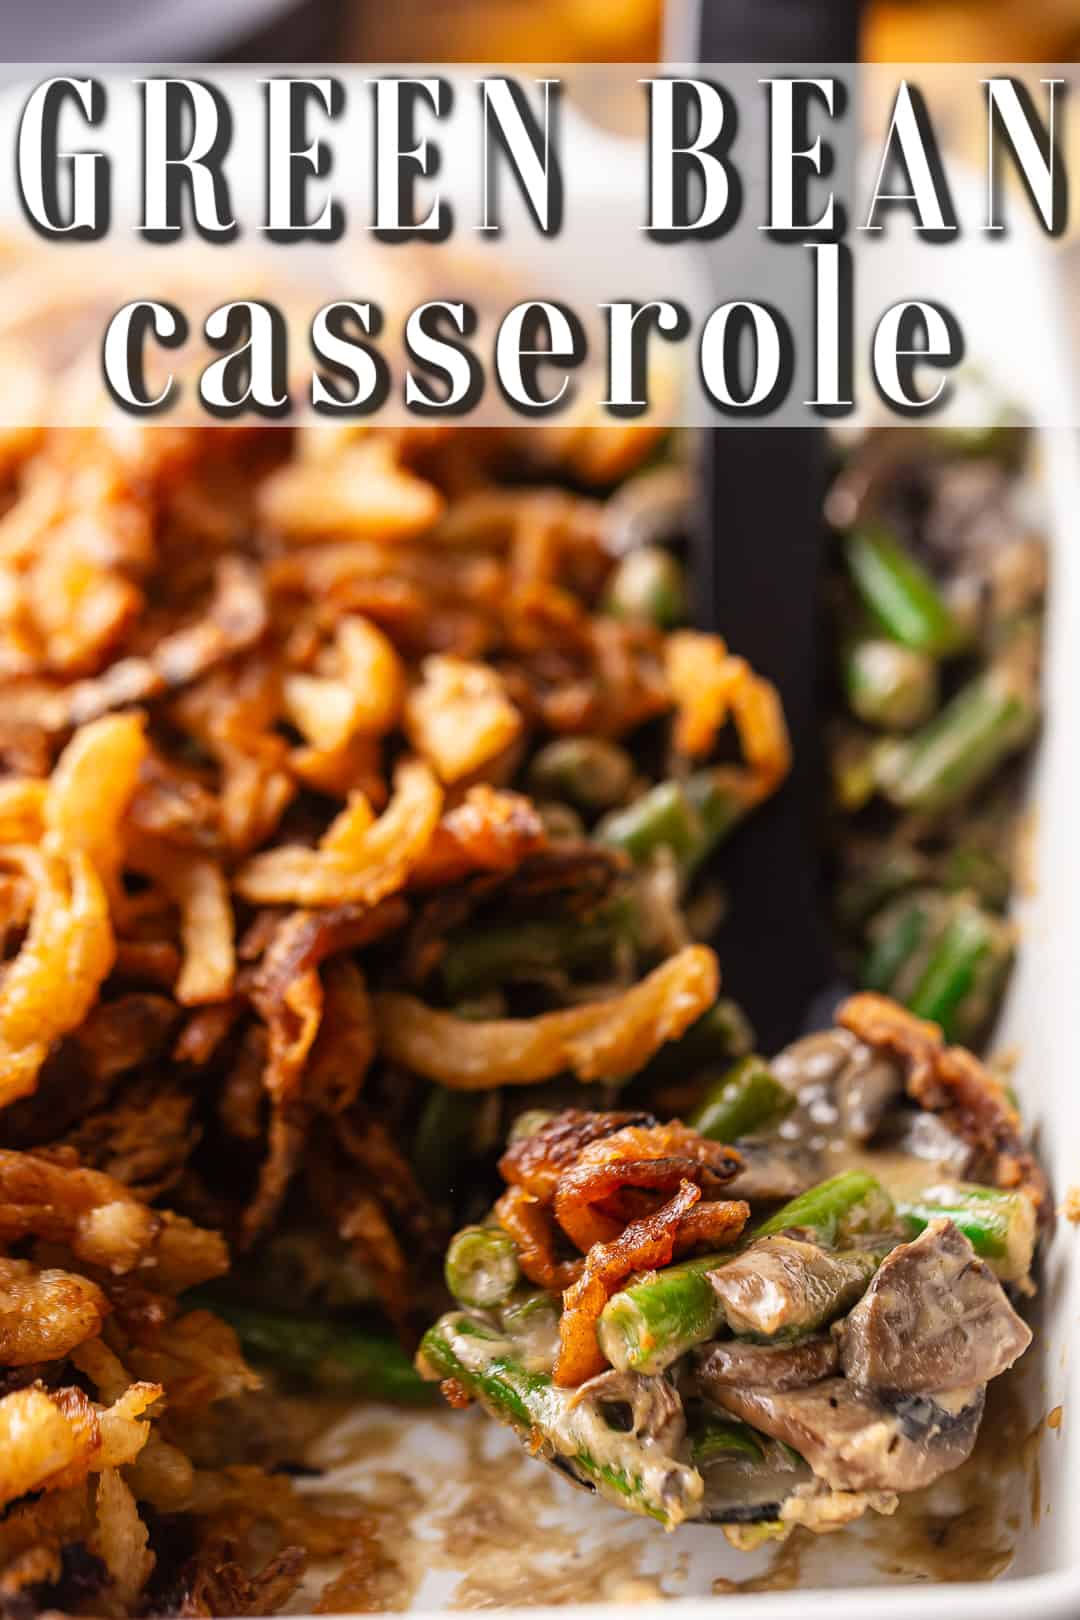 Better than Campbell's green bean casserole, made and served in a white ceramic baking dish.